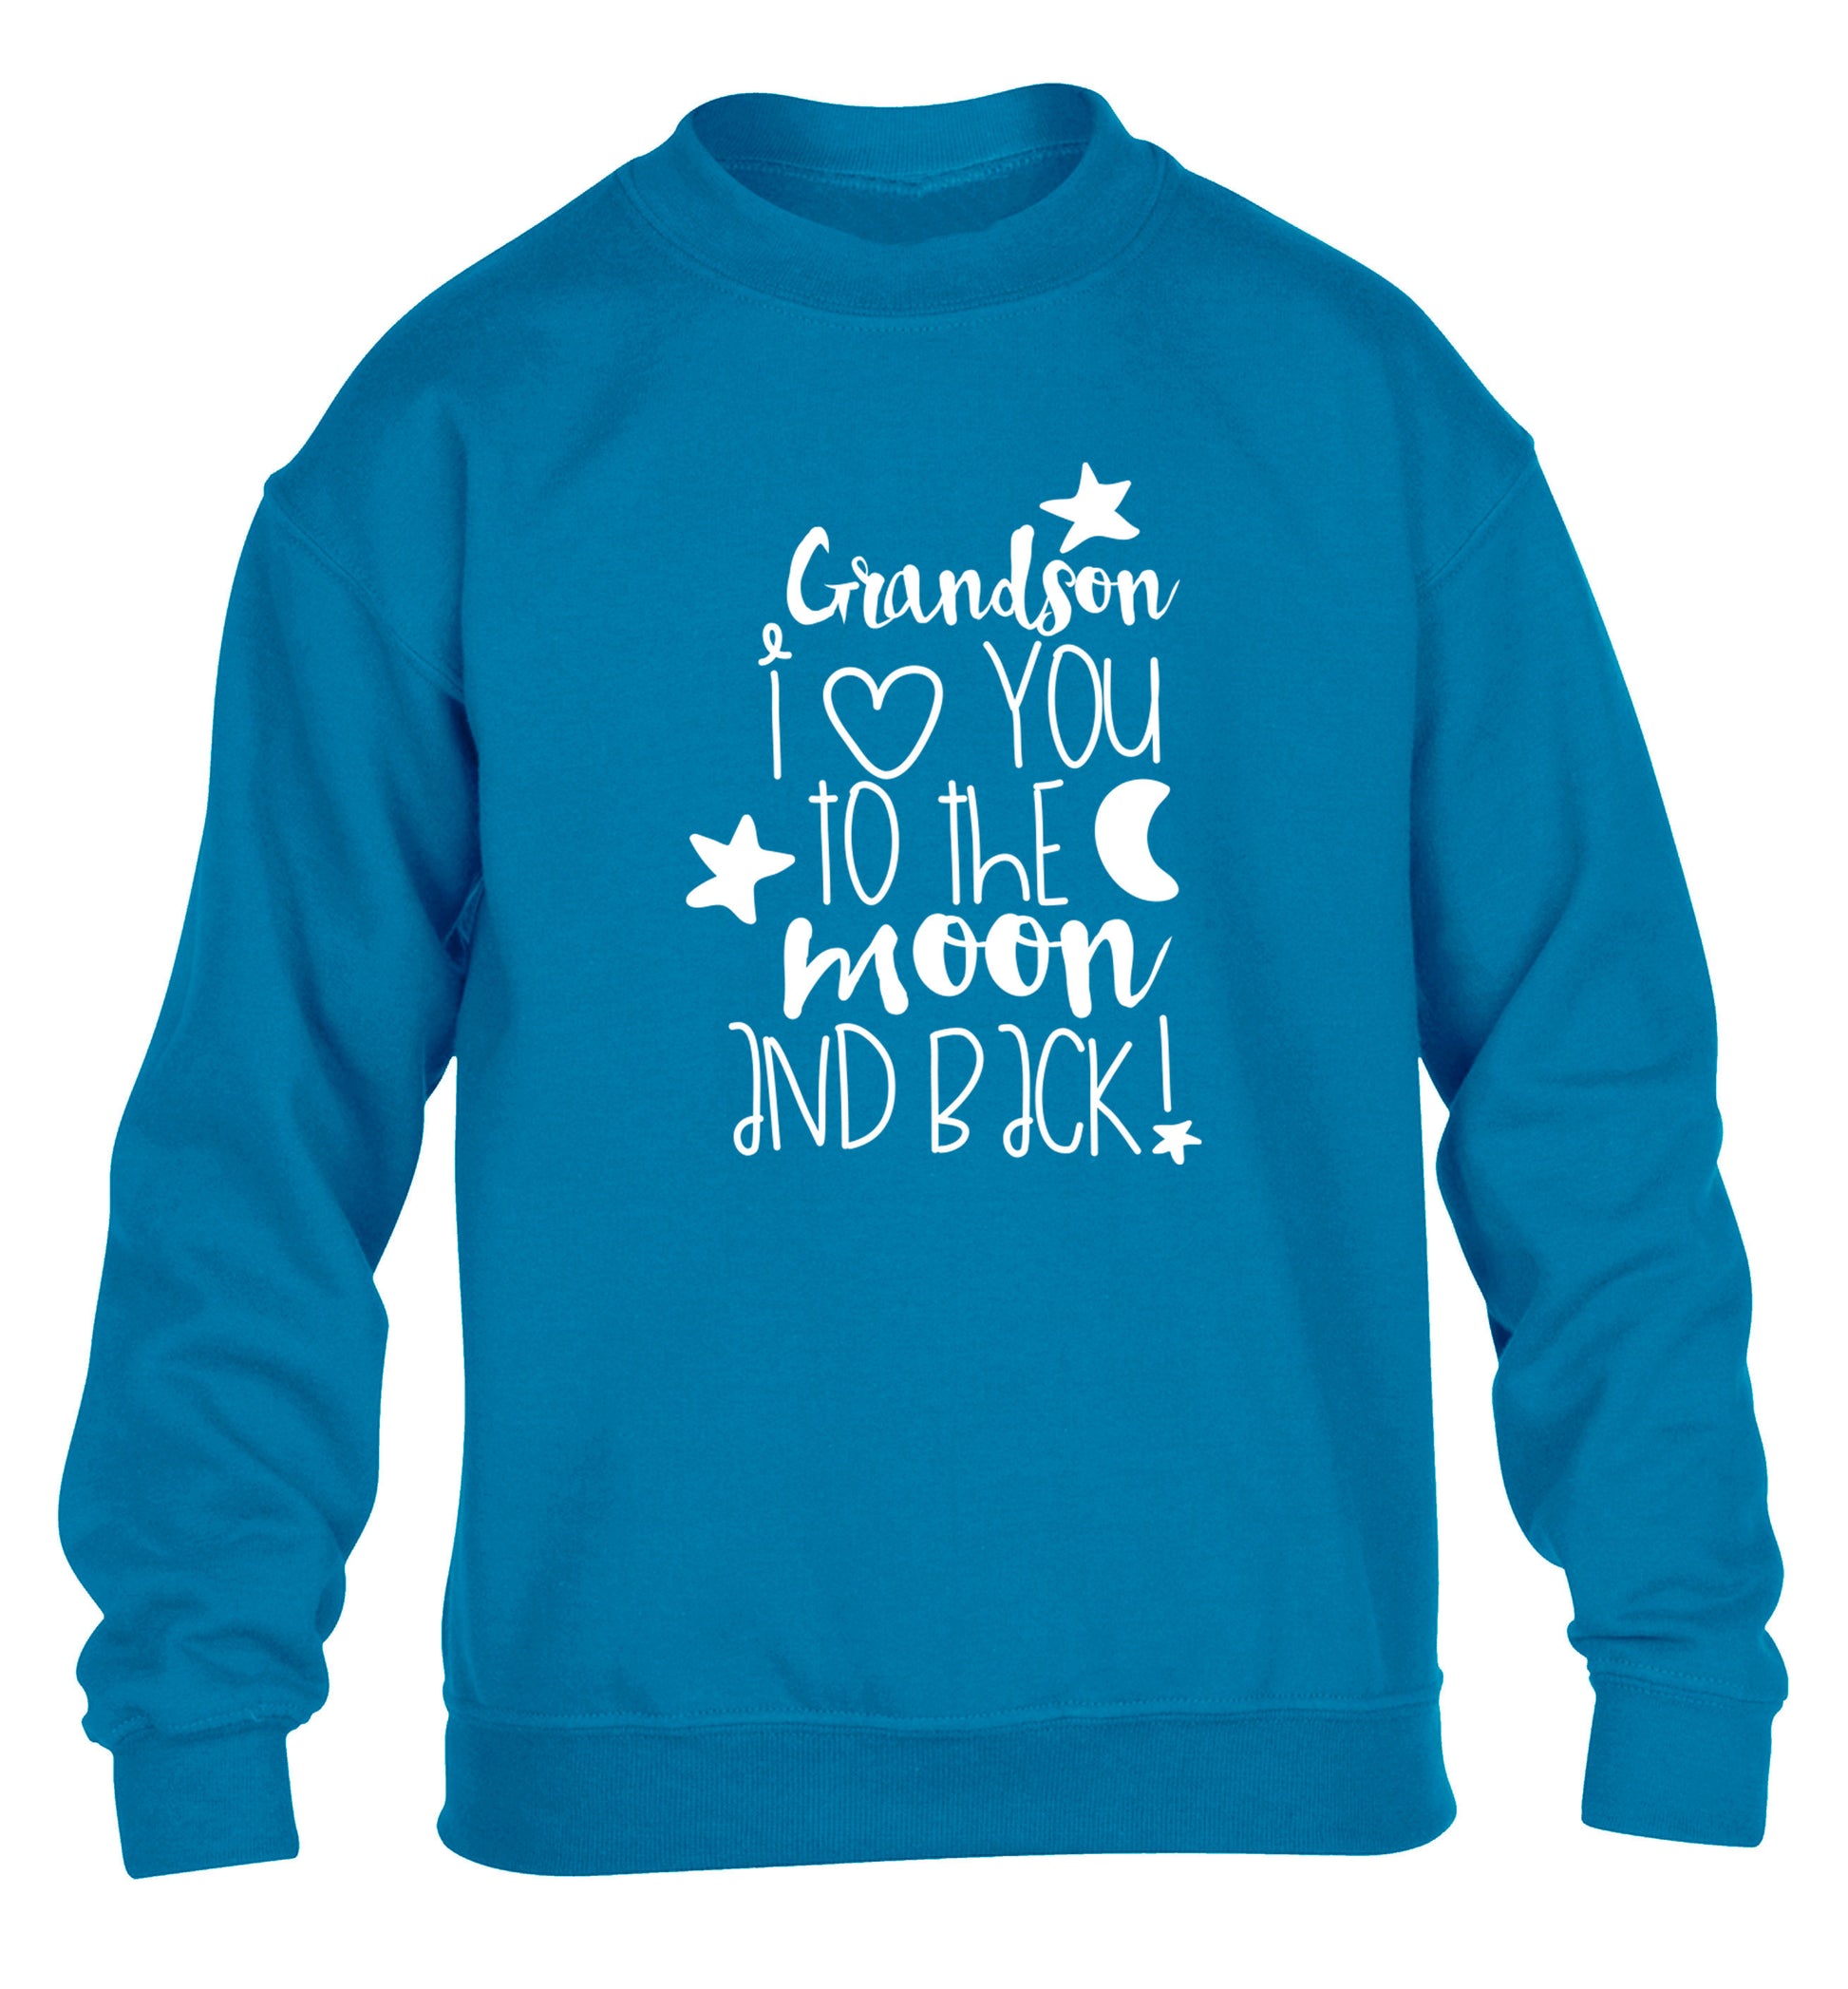 Grandson I love you to the moon and back children's blue  sweater 12-14 Years